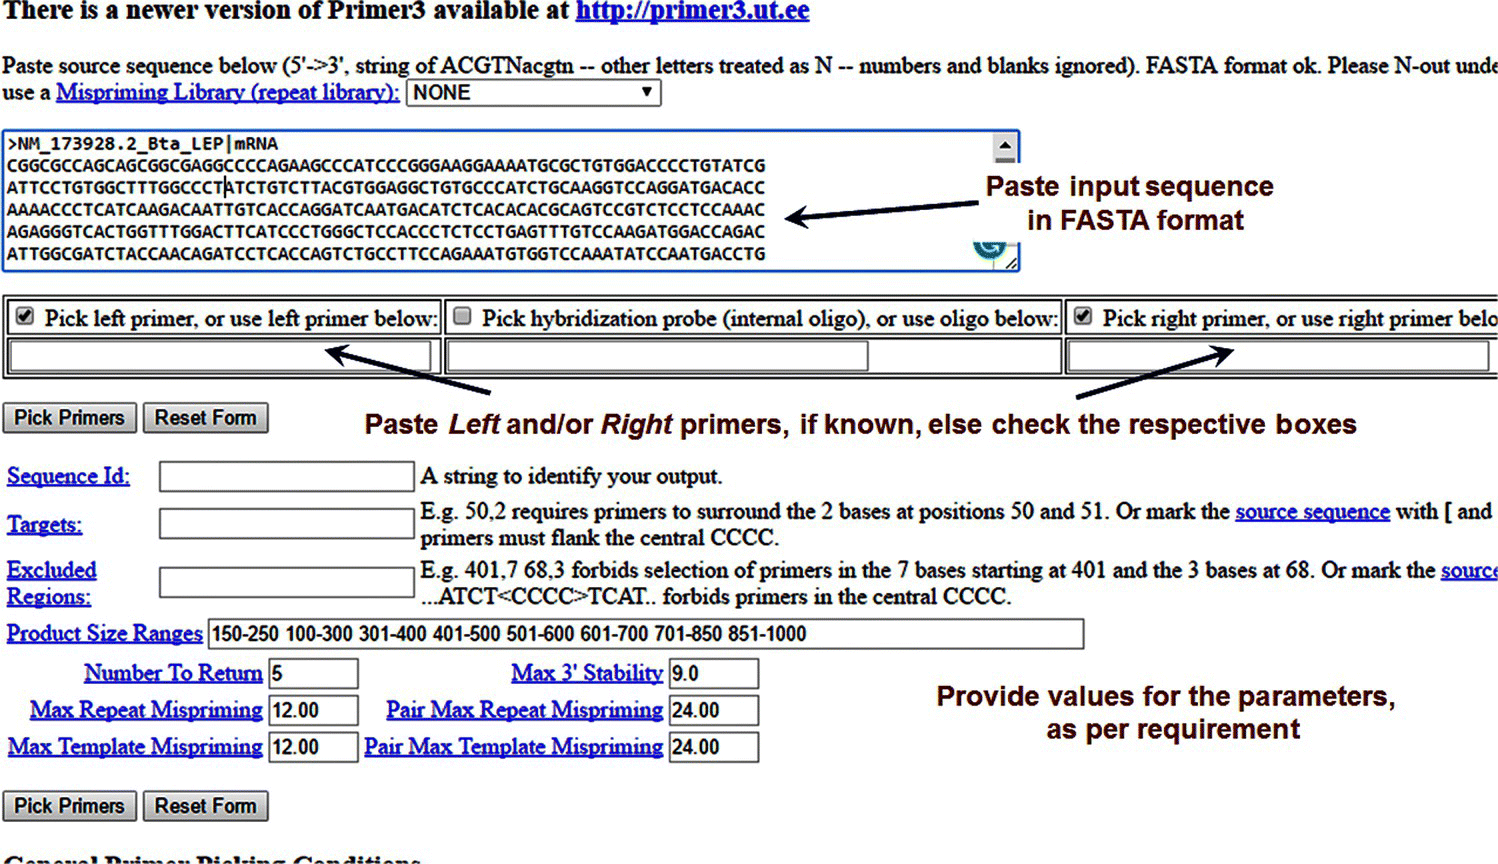 Parameters of the Primer3 online tool for primer designing, displaying 3 arrows pointing to the sequence bar, Pick left primer, or use left primer below, and pick right primer, or use right primer below.